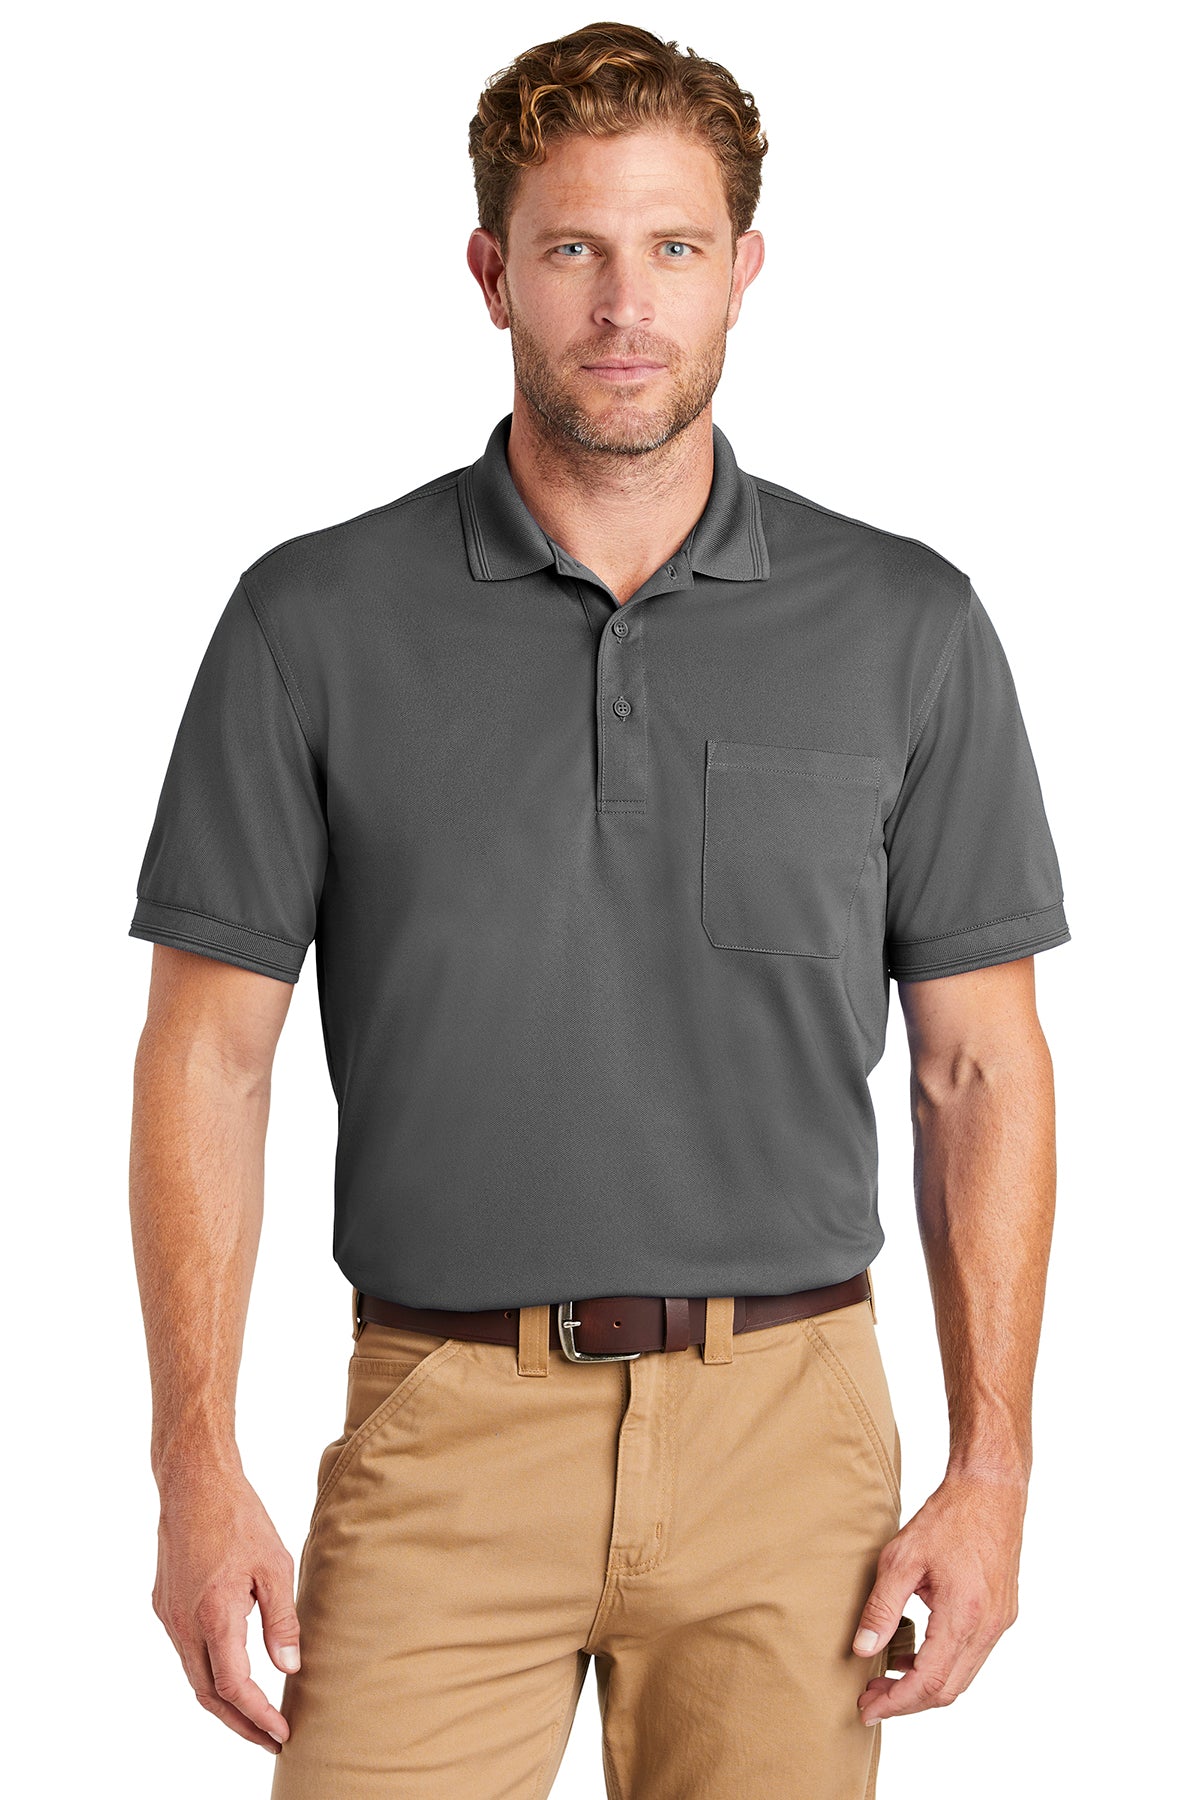 Buy charcoal CornerStone Industrial Snag-Proof Pique Pocket Polo